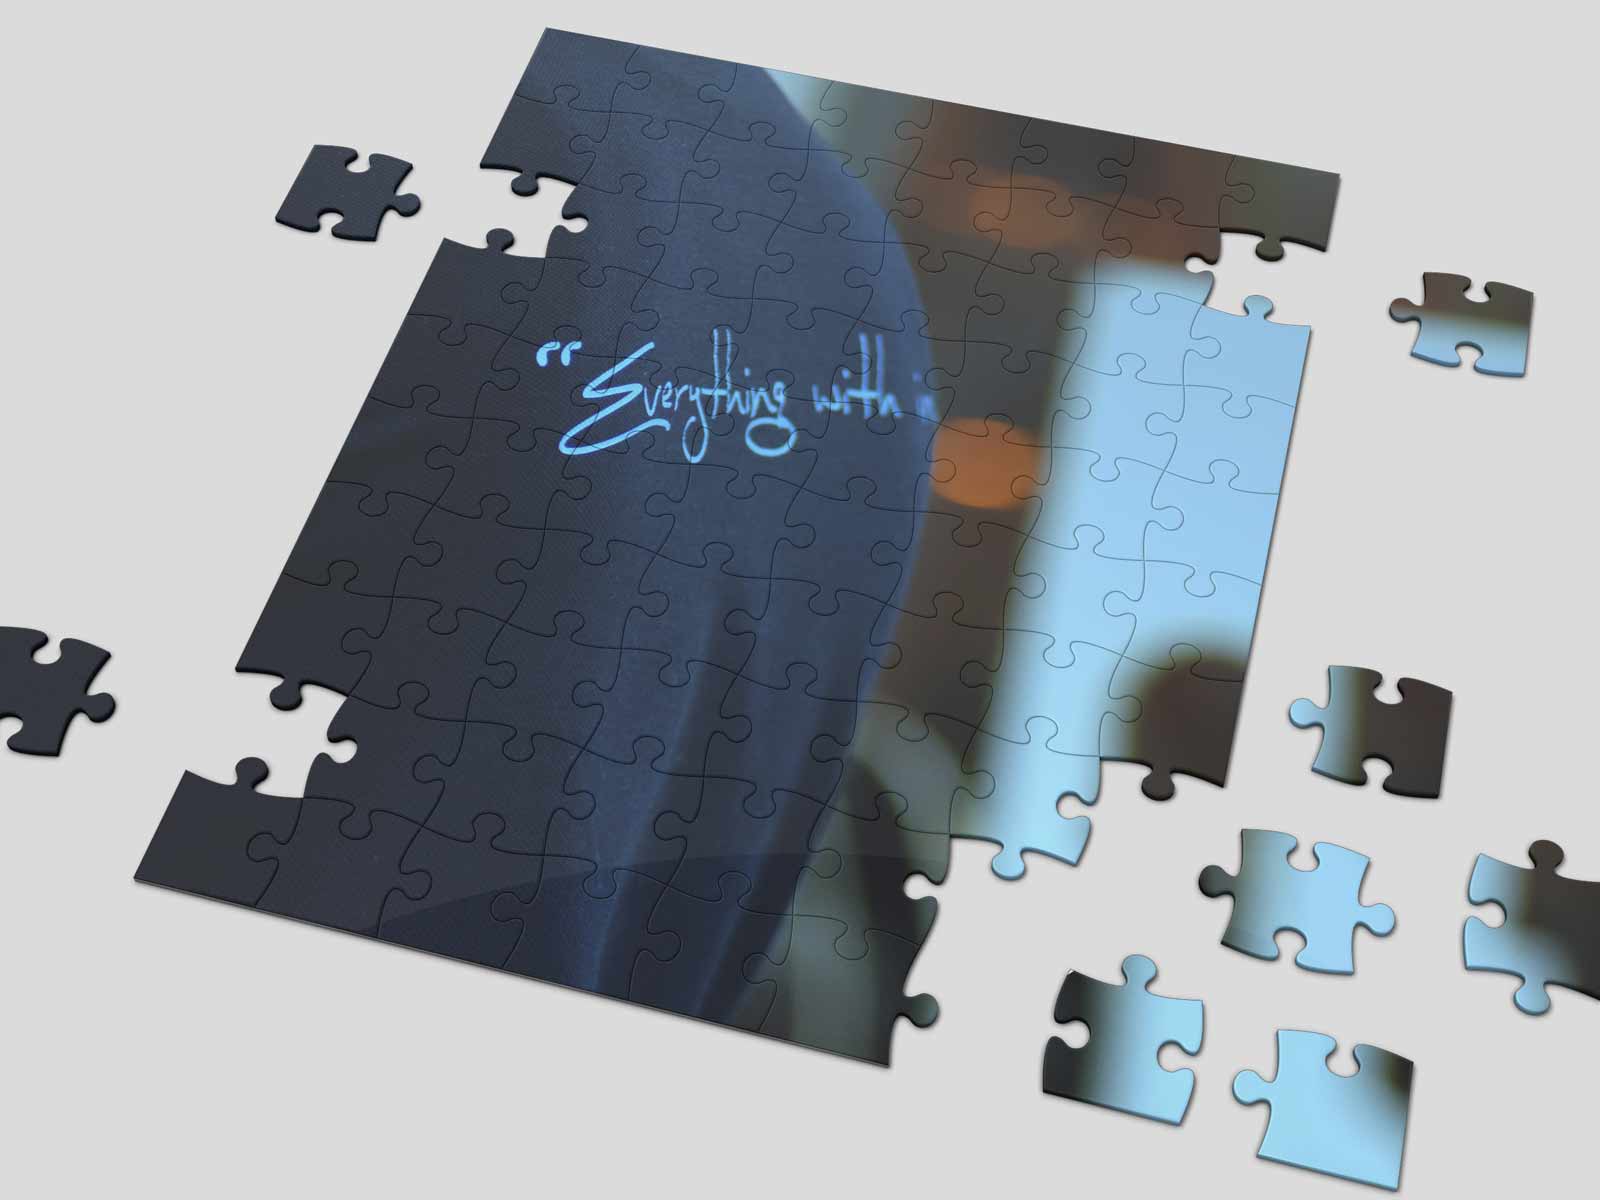 Printing on Jigsaw Game -Inkservice prints on jigsaw puzzles in Kuwait